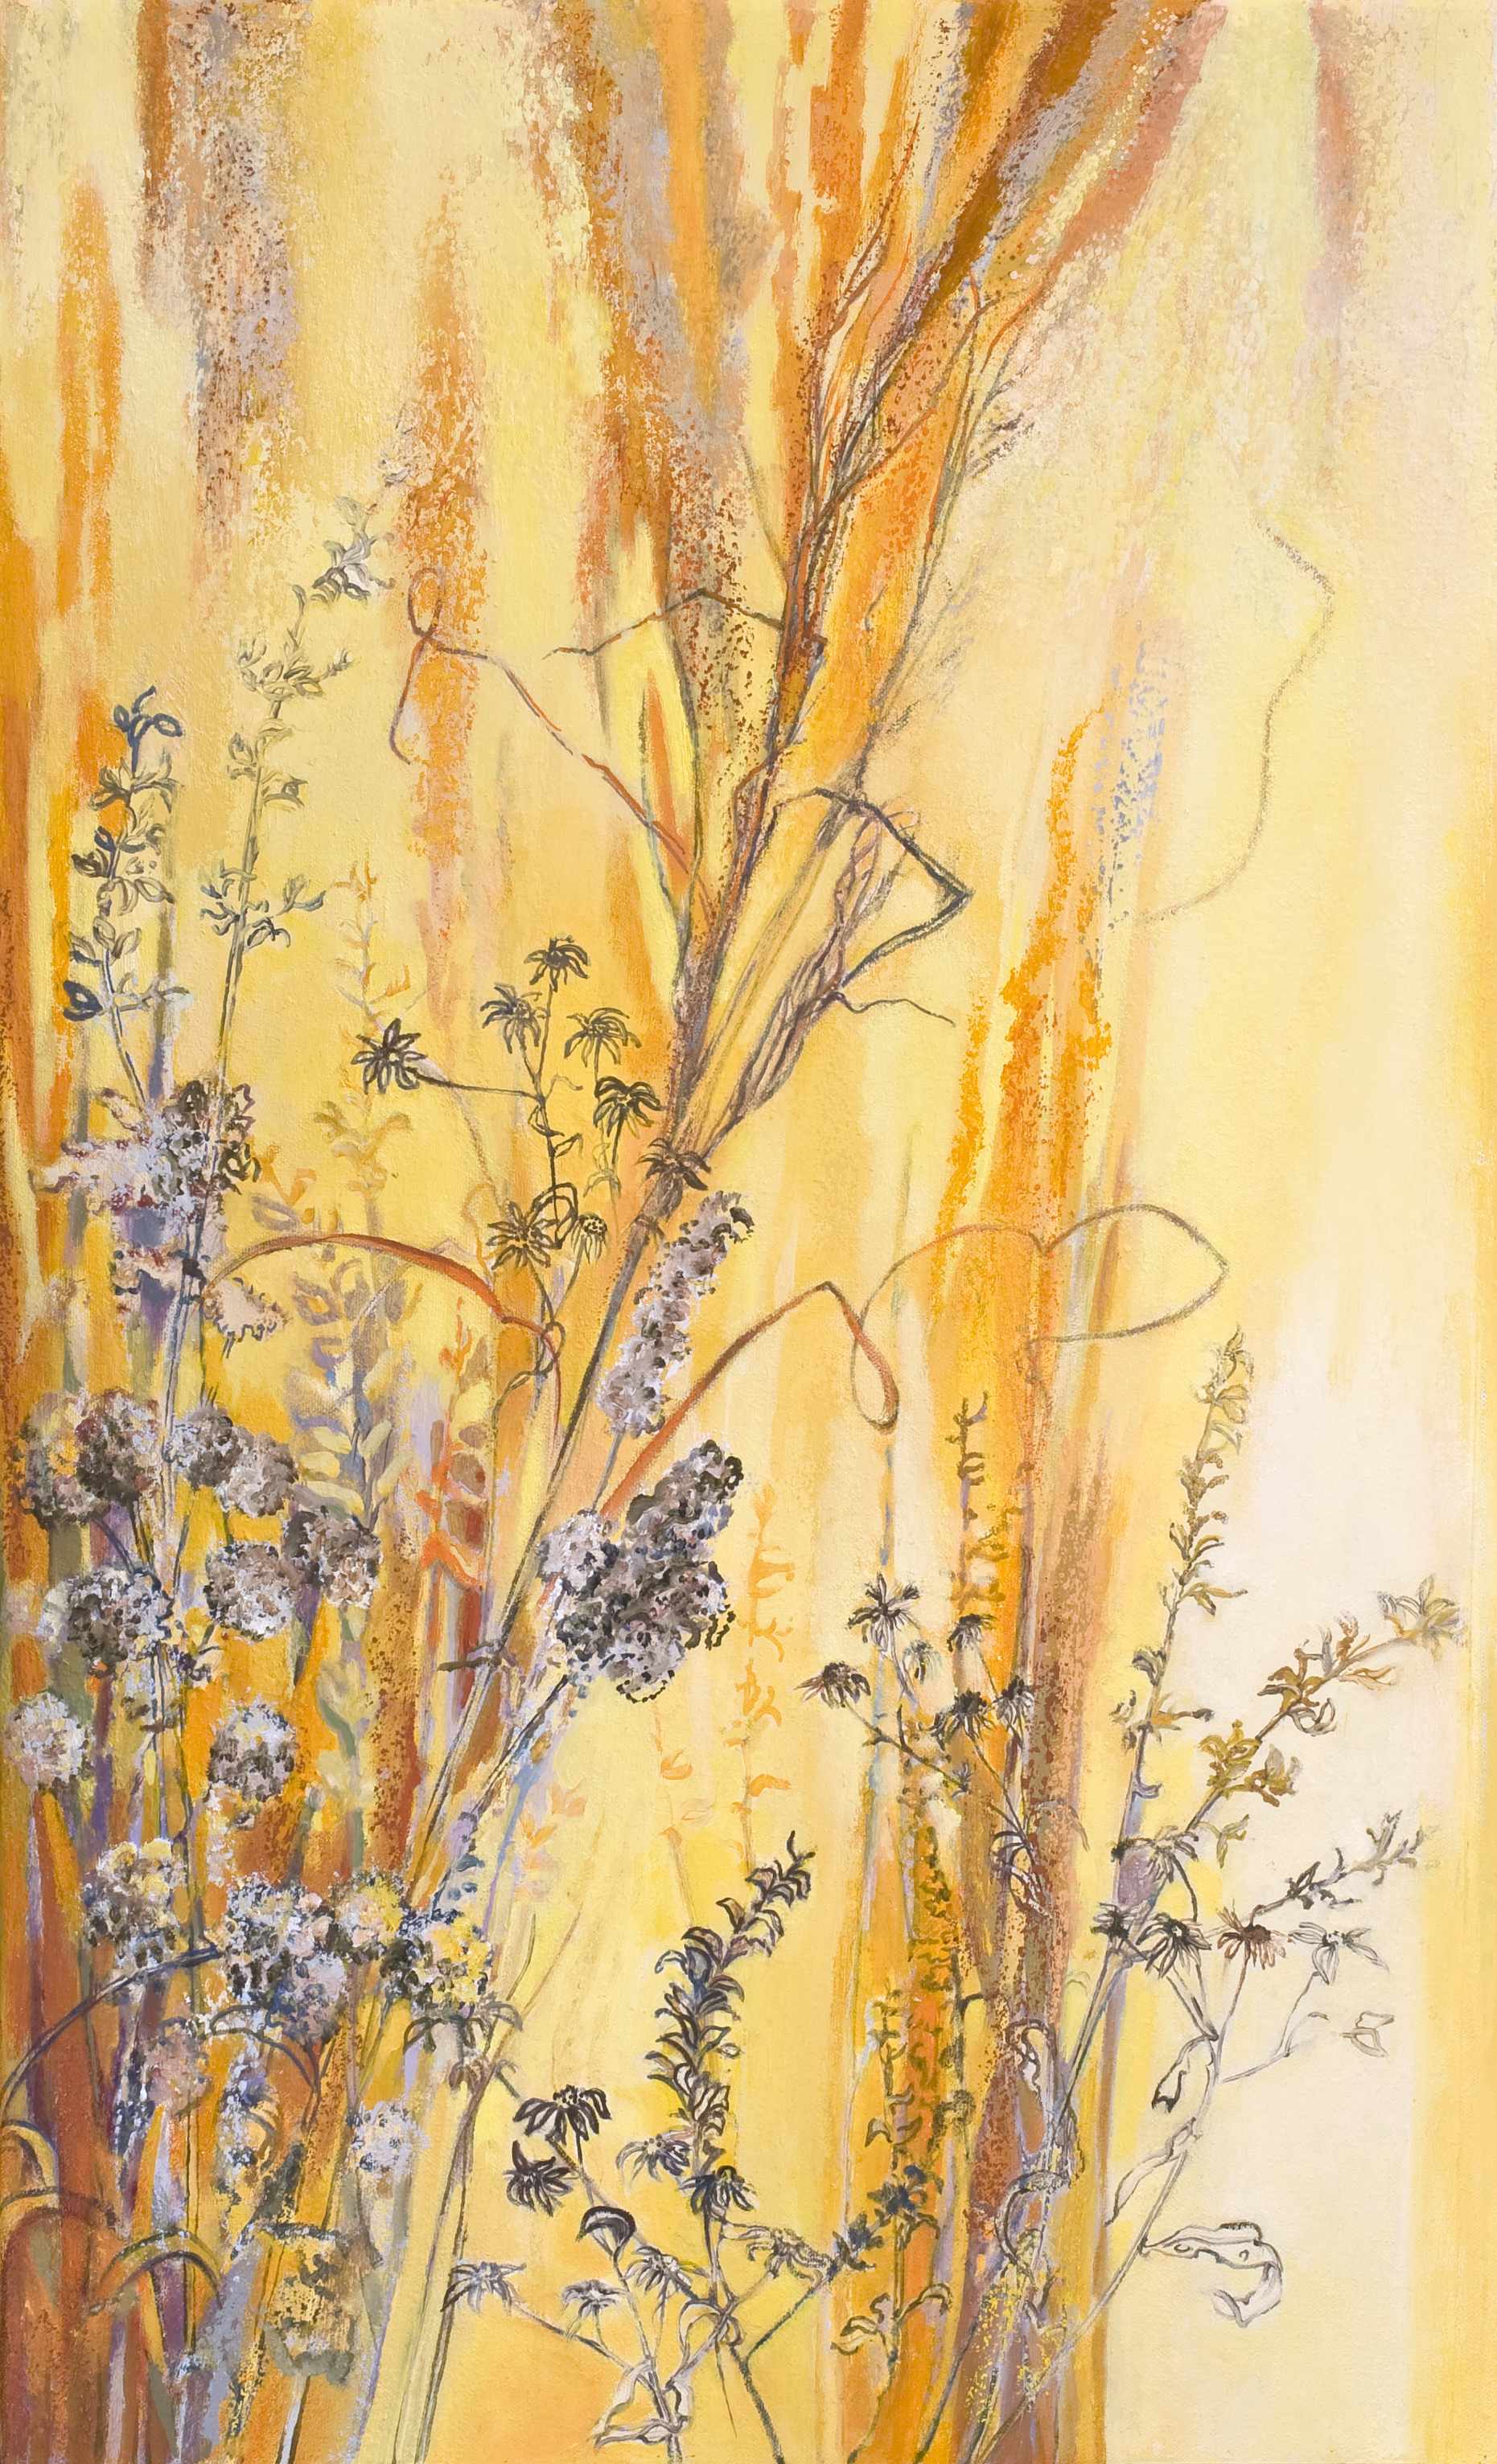 Winter Grasses, oil stick and oils on canvas, 30 ½ x 18 inches, 2008